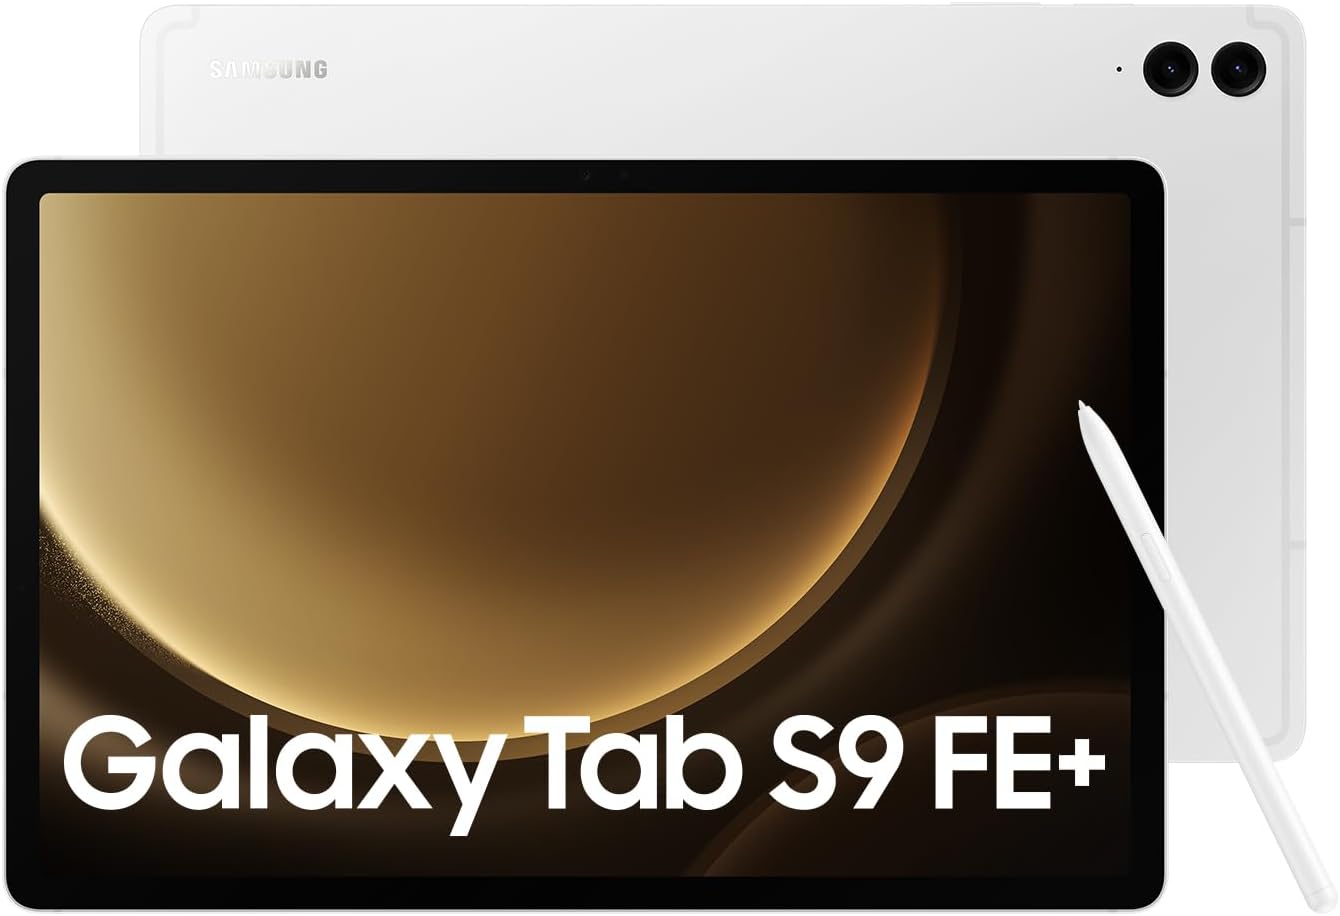 Samsung Galaxy Tab S9 FE+ 12.4 5G Tablet, Silver - Colorful design for creative possibilities and entertainment. 8806095170749